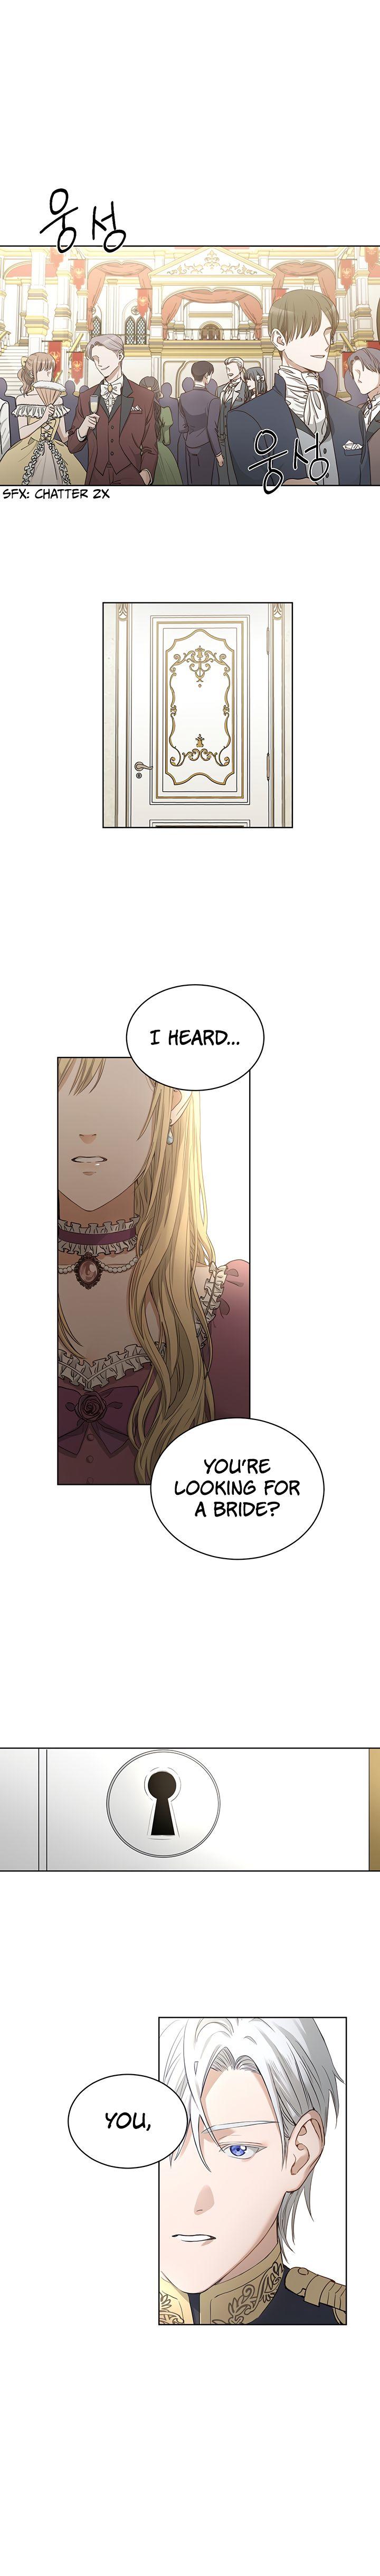 I Don T Love You Anymore Chapter 9 Read I Don T Love You Anymore Chapter 9 Online At Allmanga Us Page 1